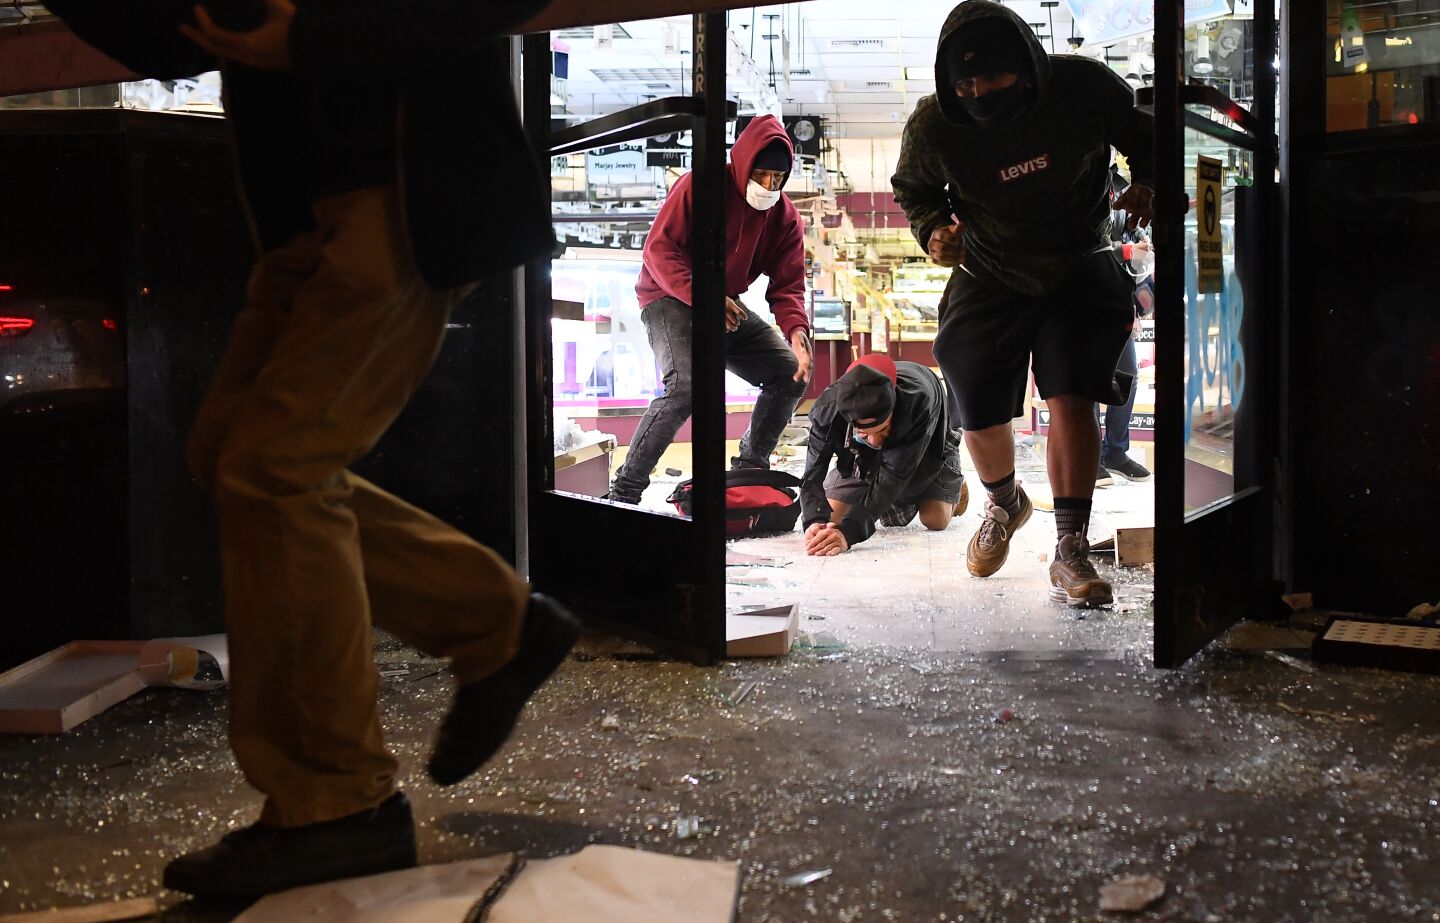 Looters run from a burglarized jewelry store as LAPD officers approach in downtown Los Angeles